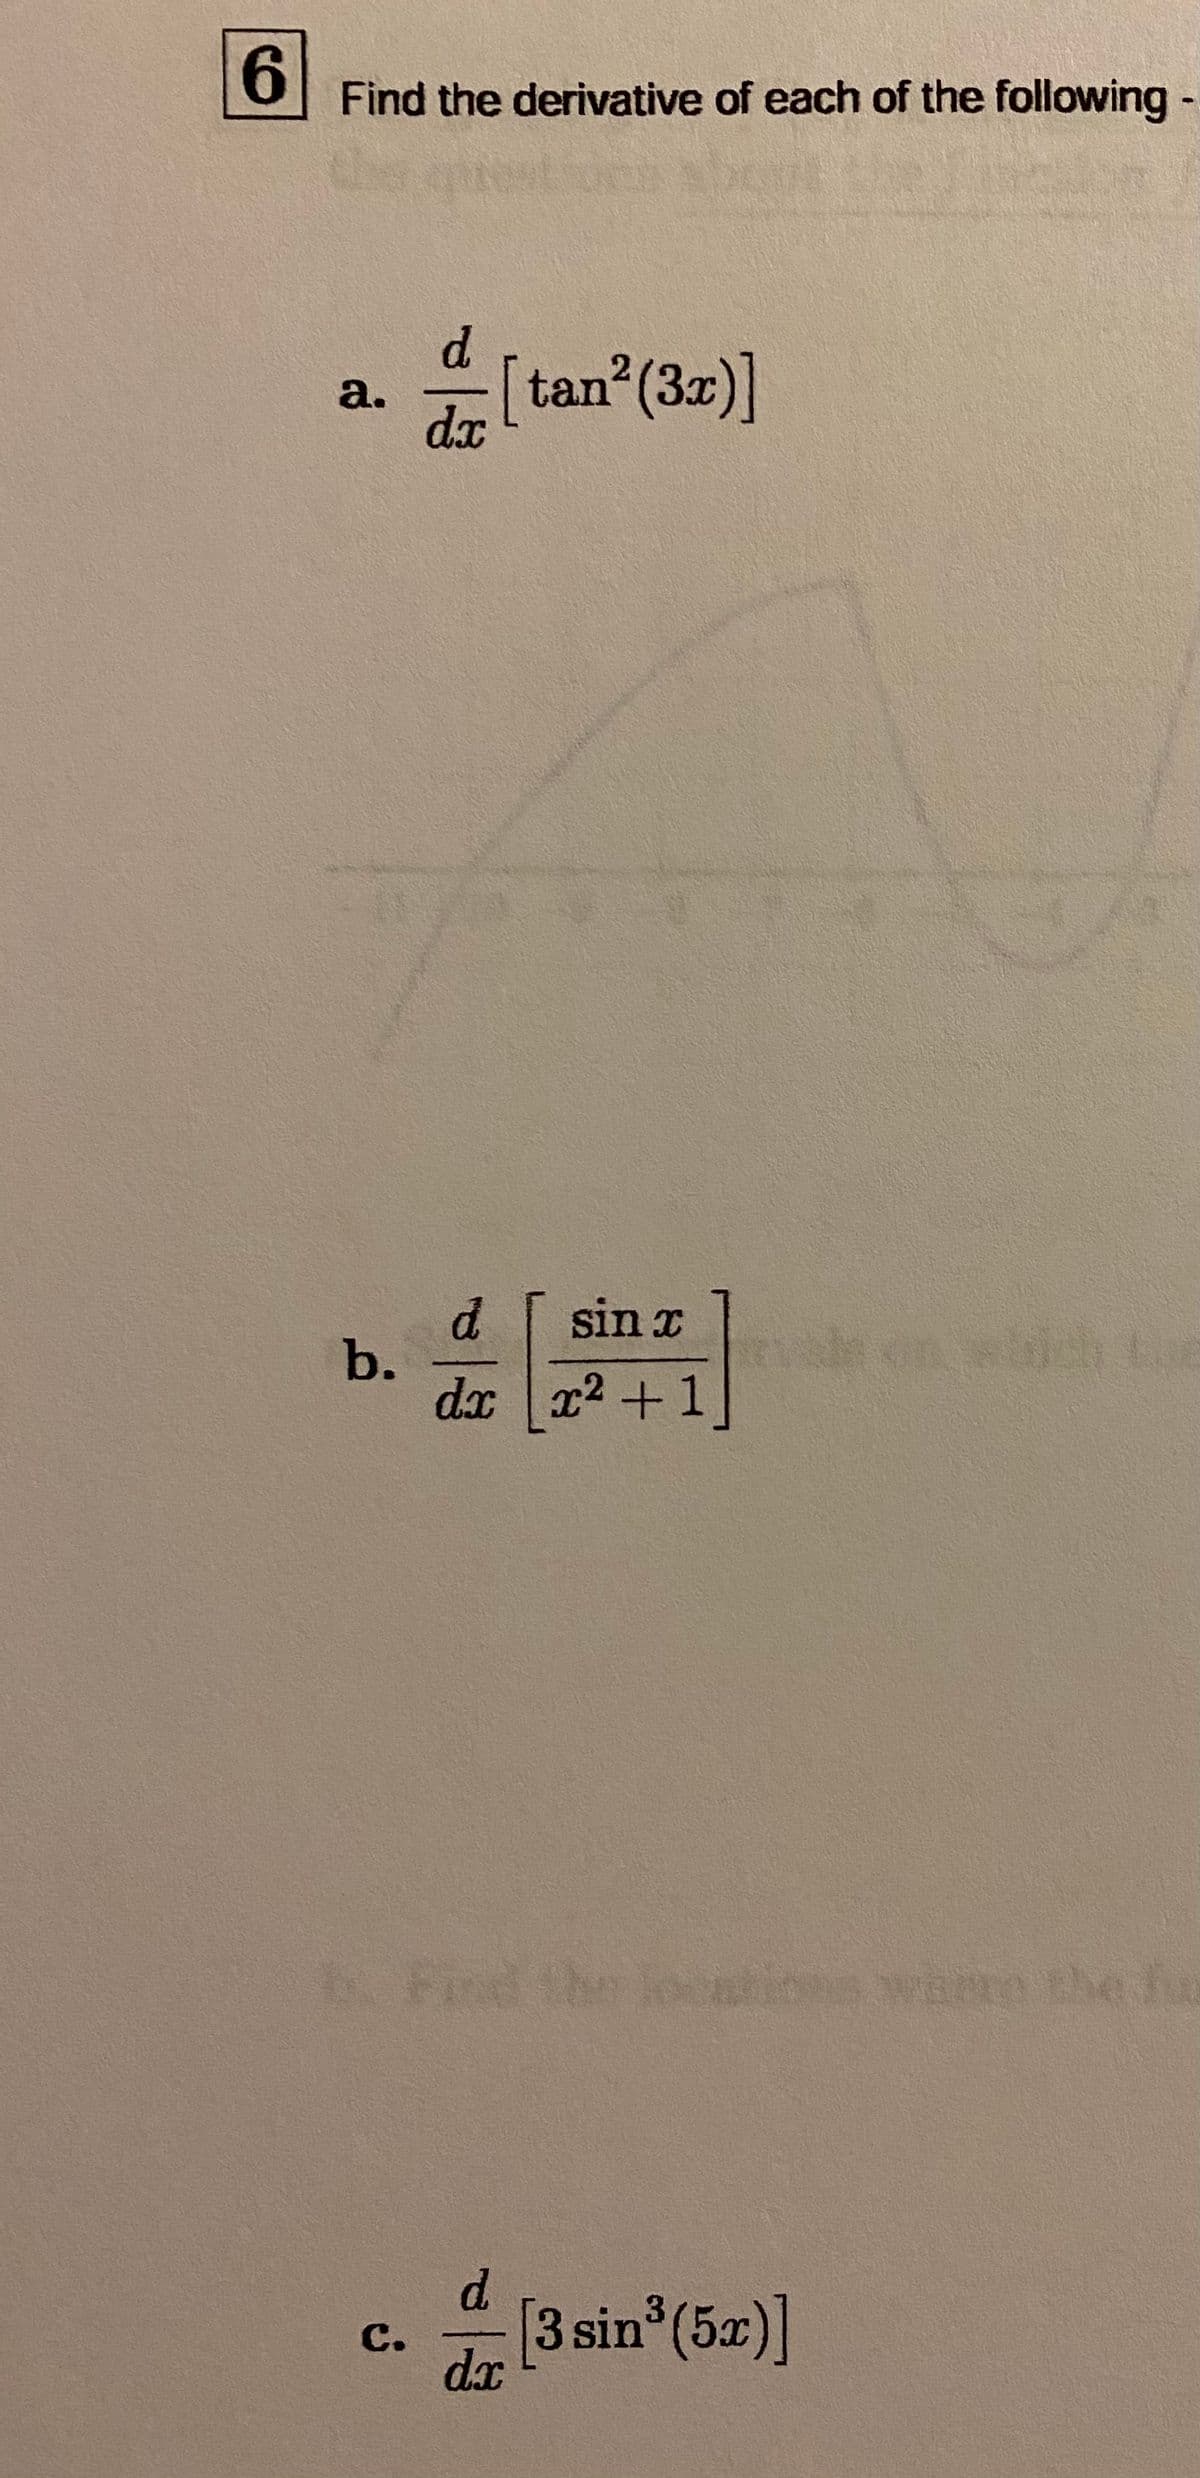 6.
Find the derivative of each of the following -
d.
a.
dx
[tan (3x)]
d.
b.
dx x2 +1
sin x
ocntins whre the fu
d.
[3 sin (5x)]
с.
